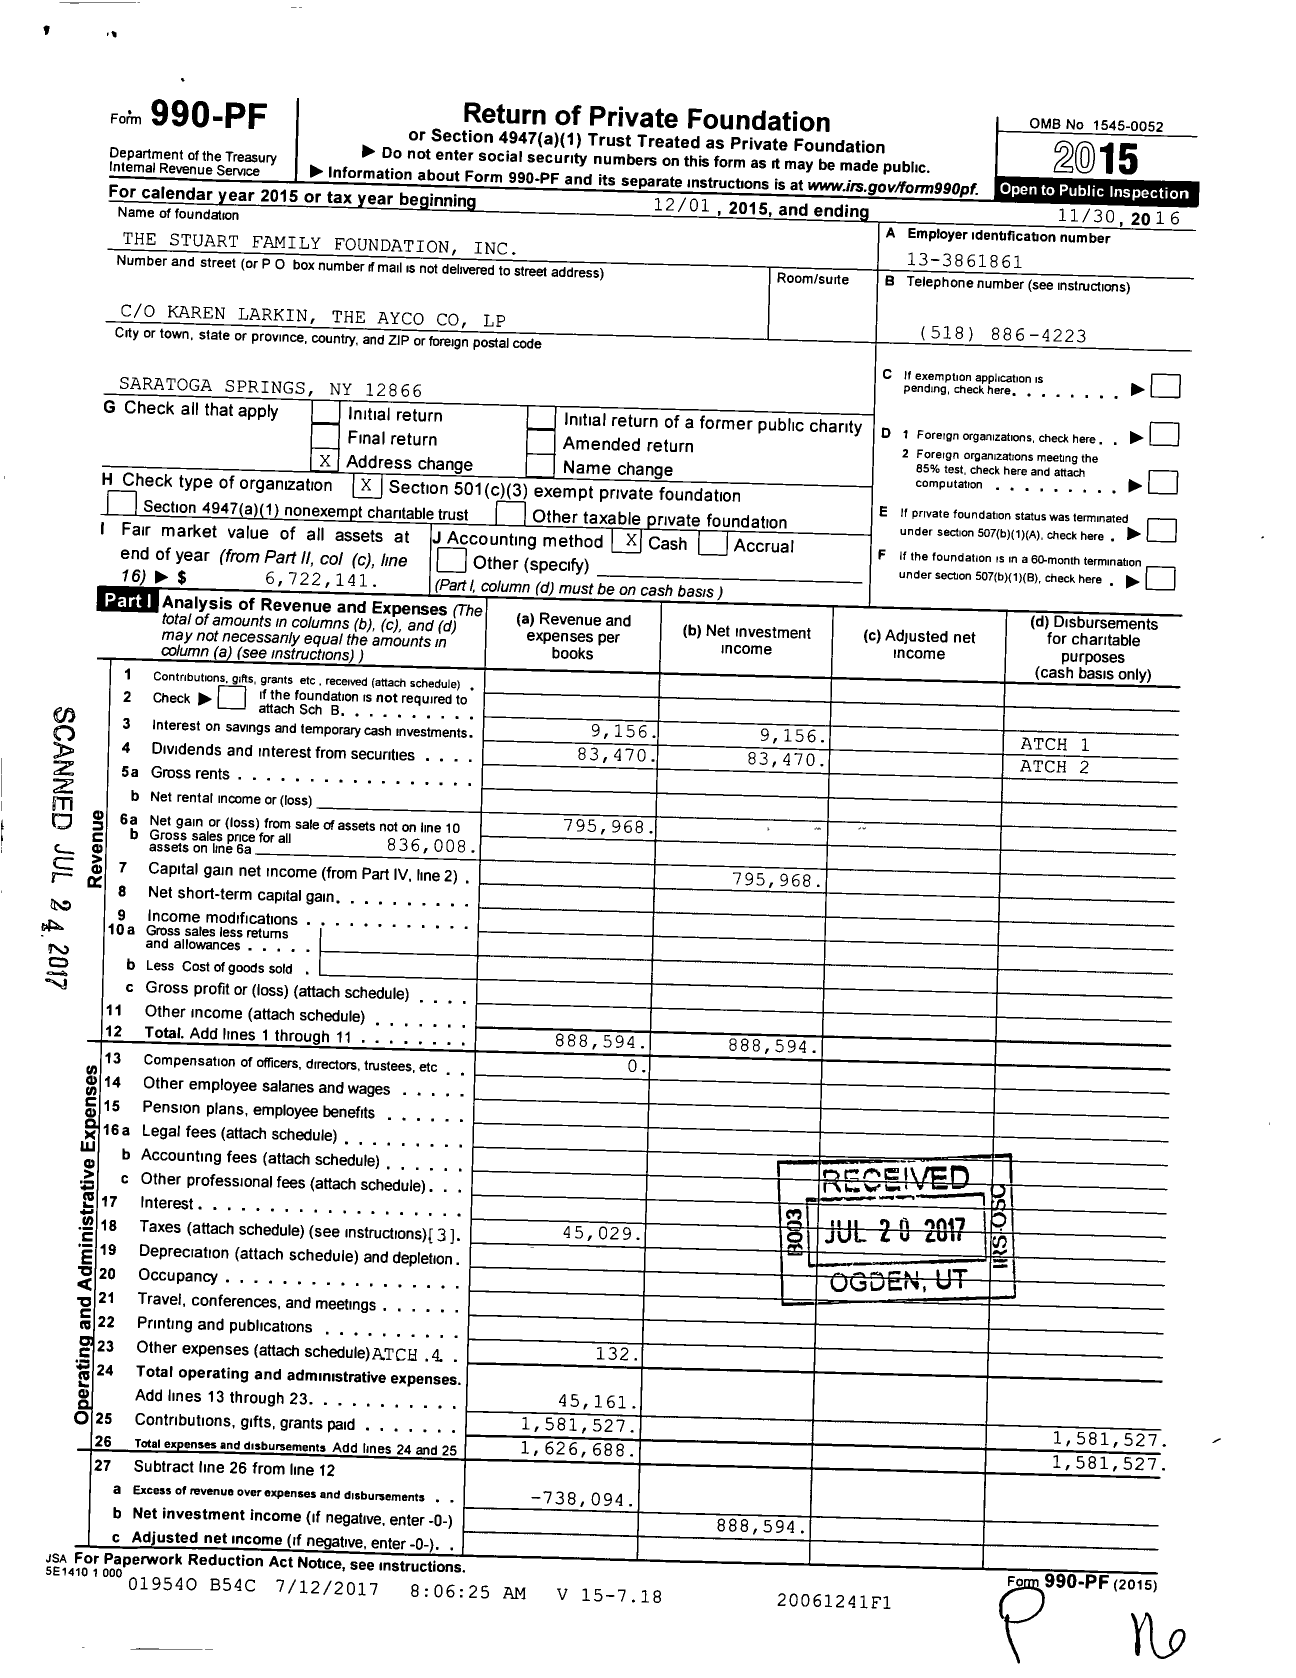 Image of first page of 2015 Form 990PF for The Stuart Family Foundation